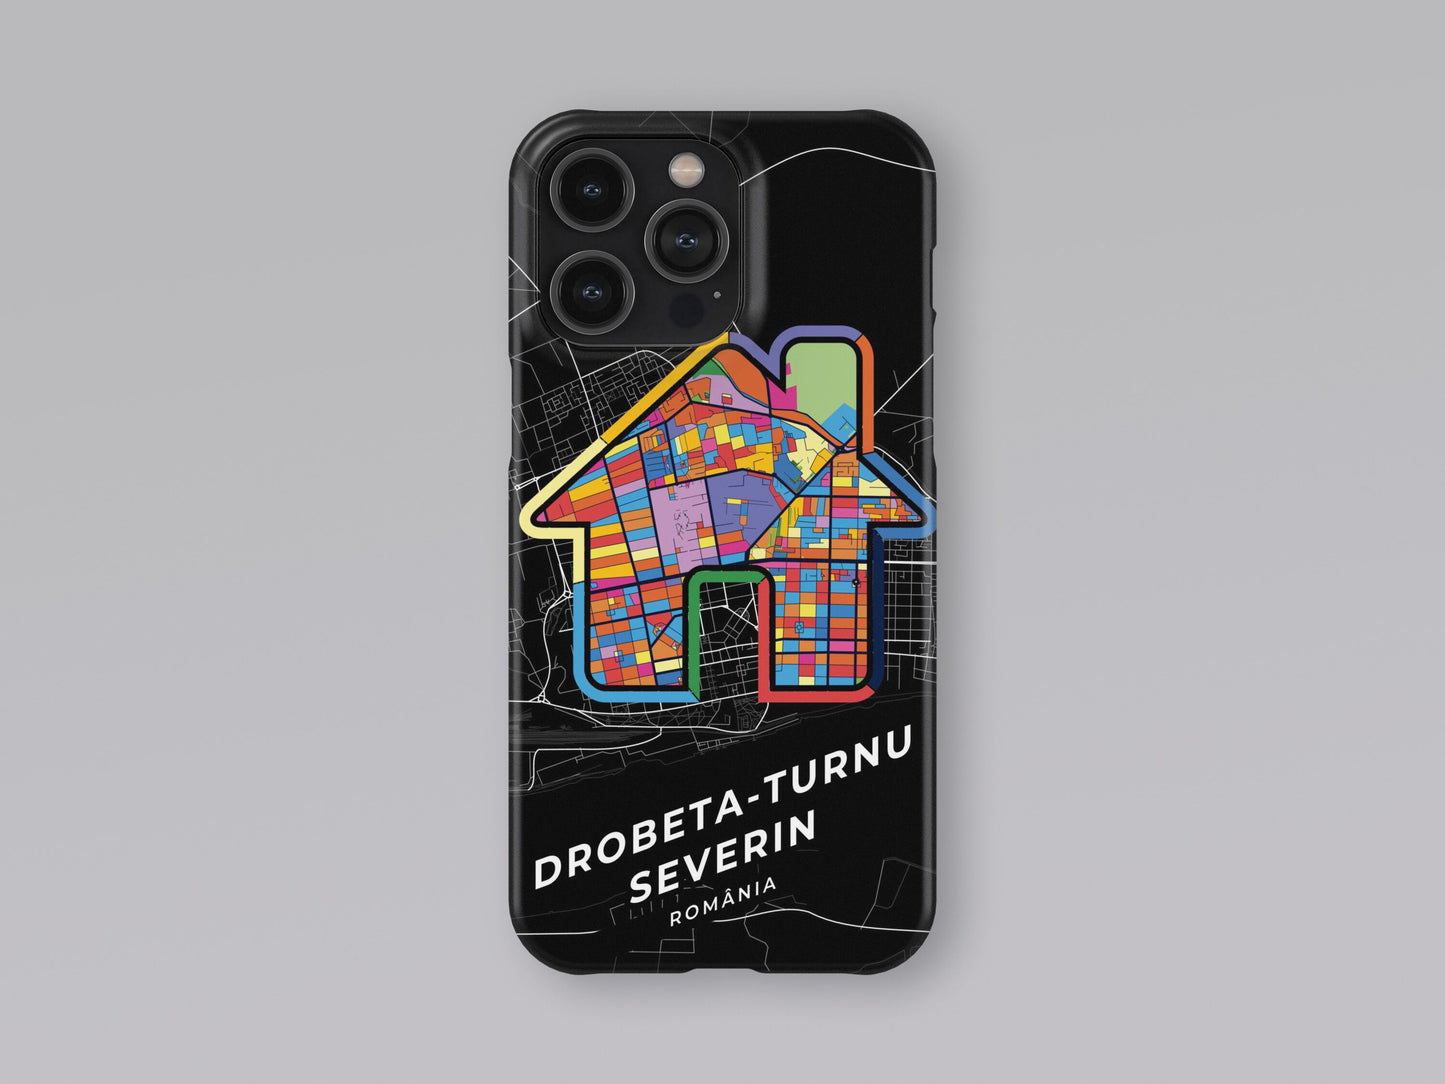 Drobeta-Turnu Severin Romania slim phone case with colorful icon. Birthday, wedding or housewarming gift. Couple match cases. 3